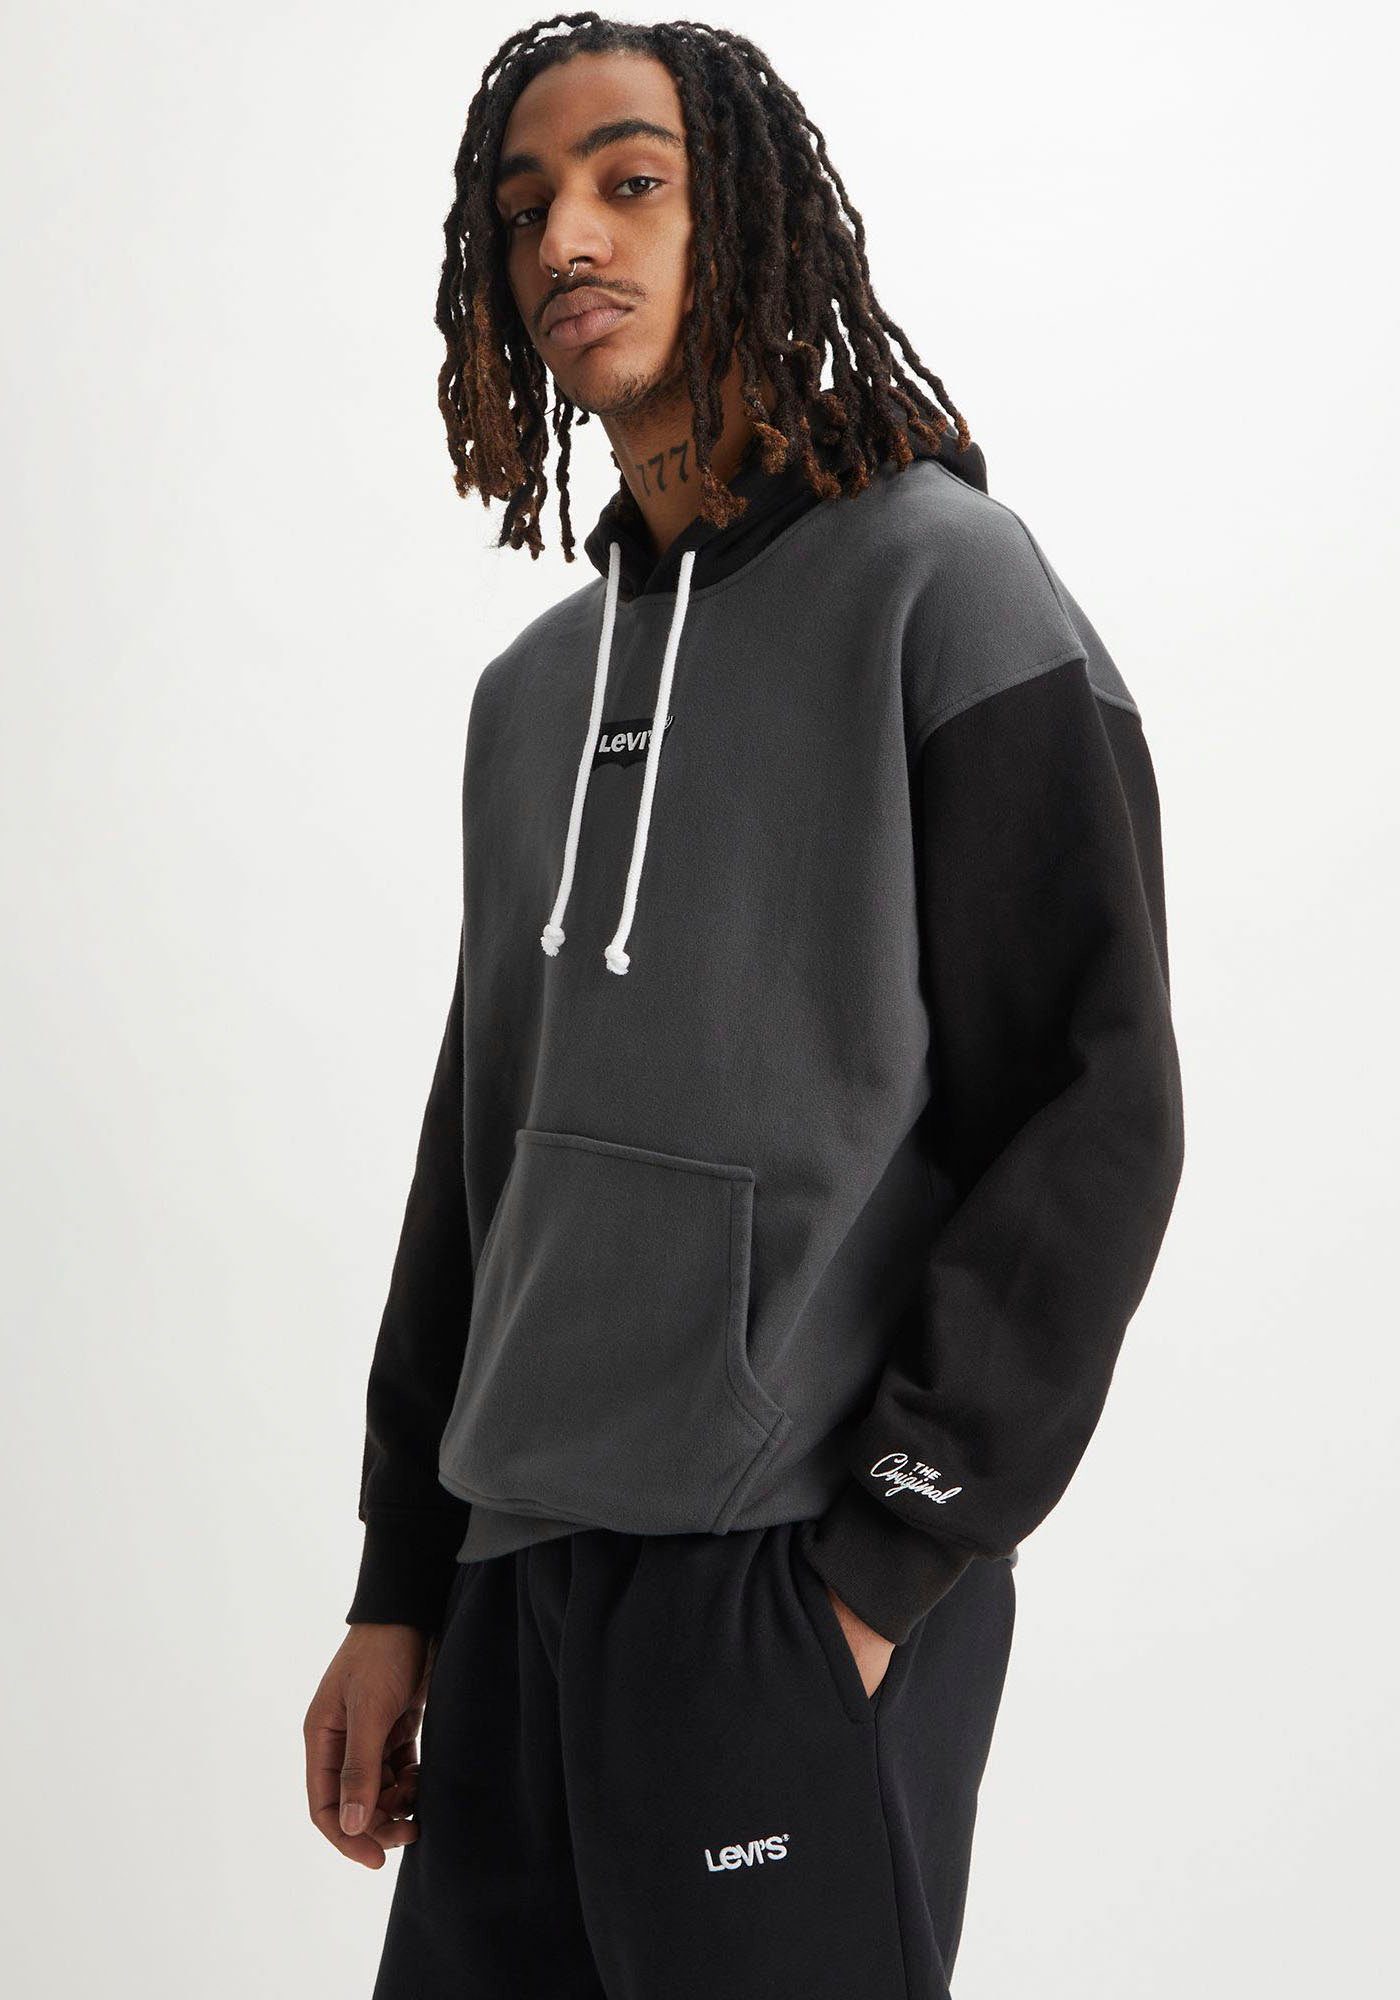 RELAXED grau-schwarz Levi's® GRAPHIC Hoodie